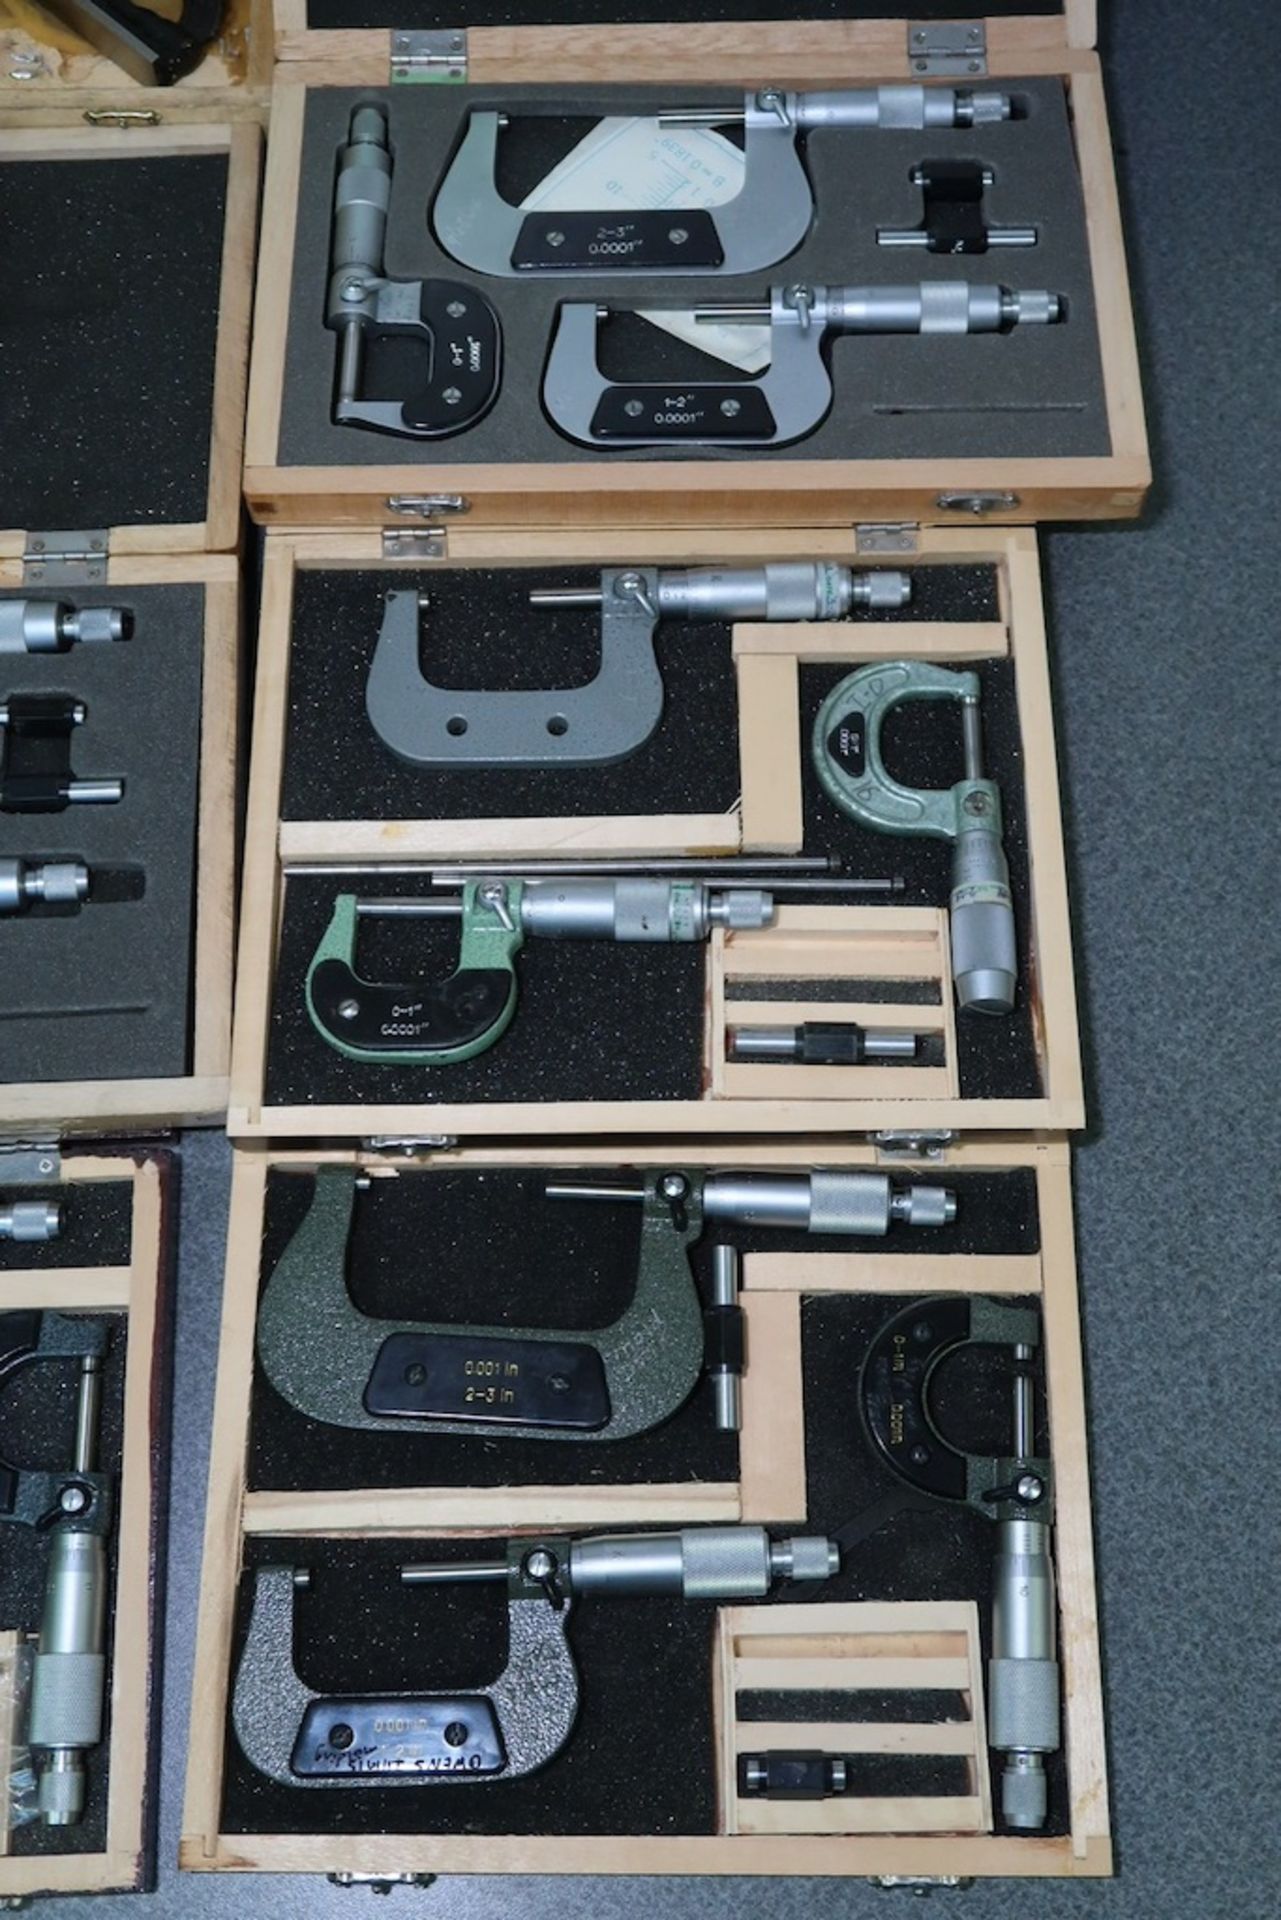 (17) OD Micrometers, 0-1" to 2-3" with Combination Square Set - Image 2 of 4